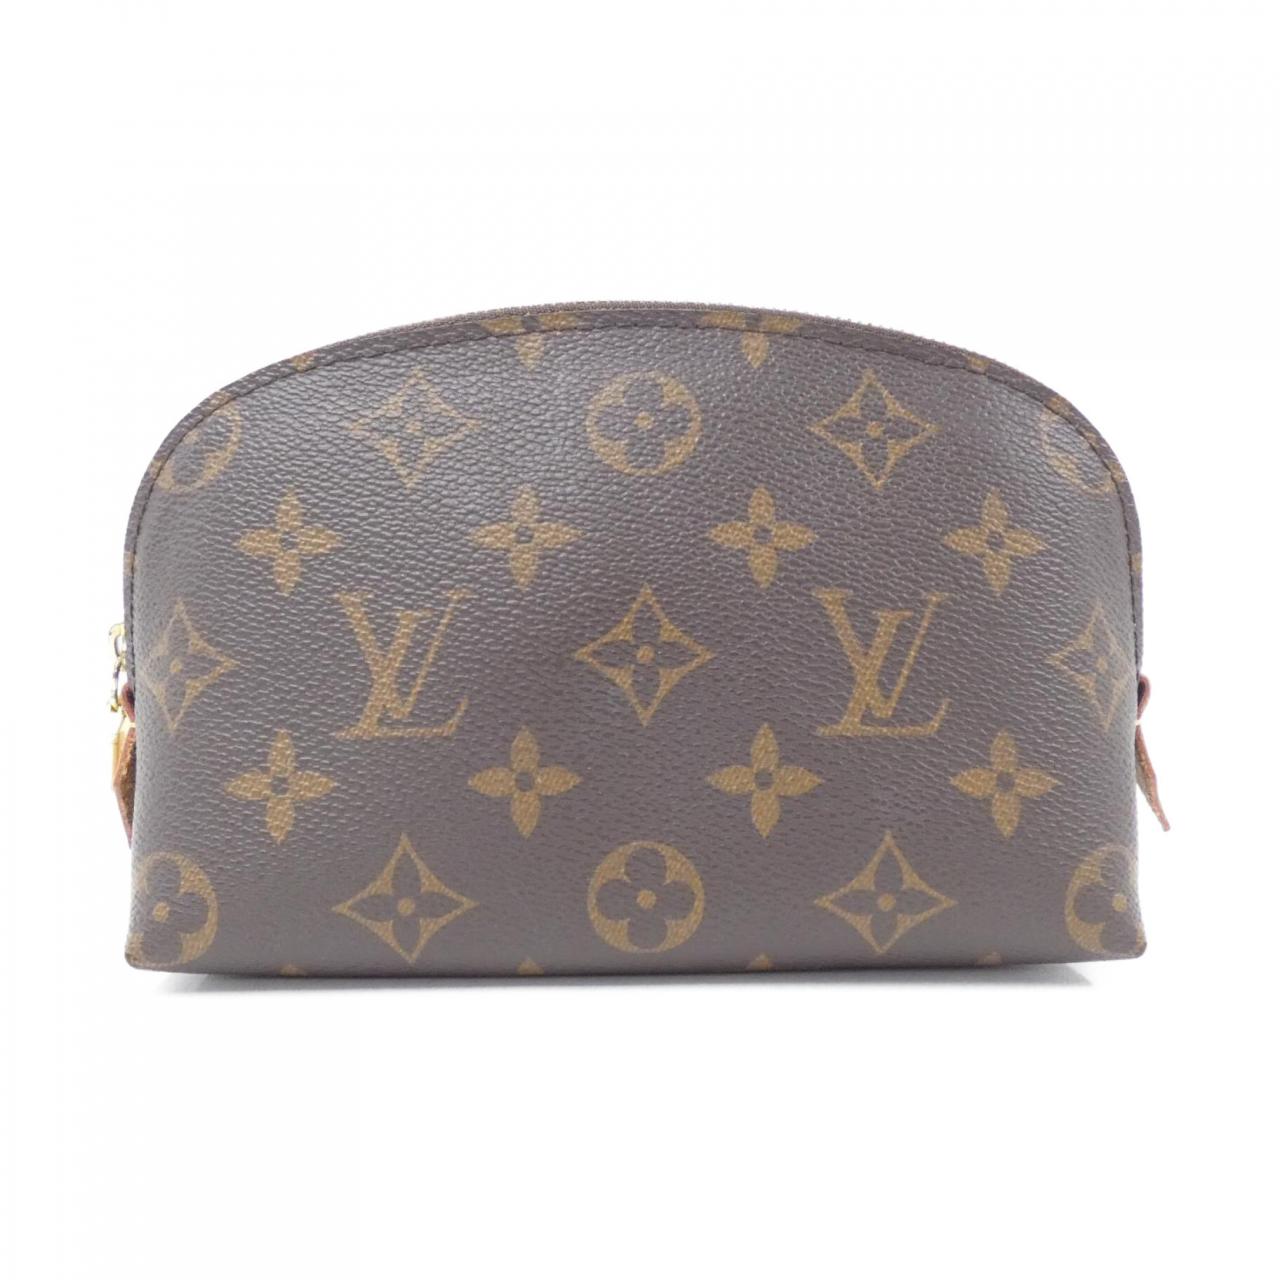 1 WEEK UPDATE ON THE NEW LOUIS VUITTON COSMETIC POUCH GM M46458 + WHAT'S IN  MY BAG & IS IT WORTH IT? 